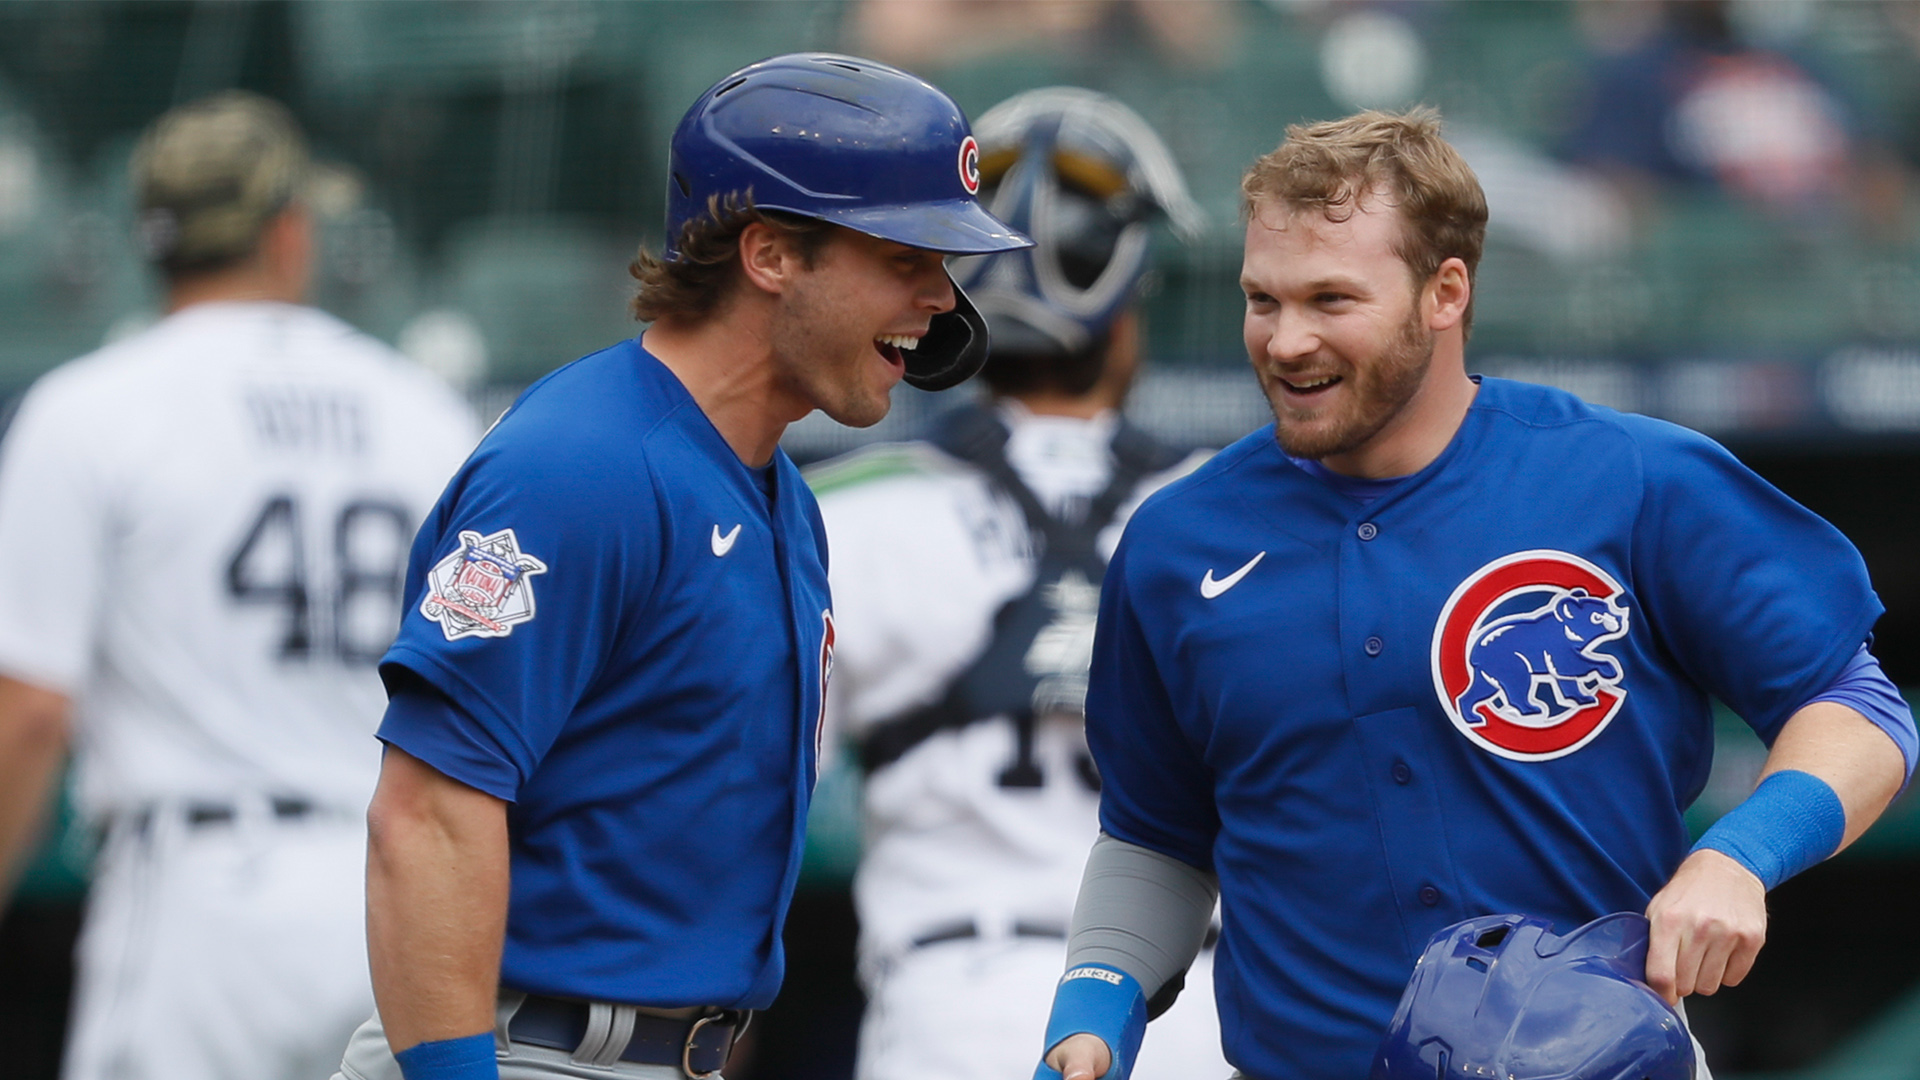 Ian Happ: A great night for the Cubs ends with an injury